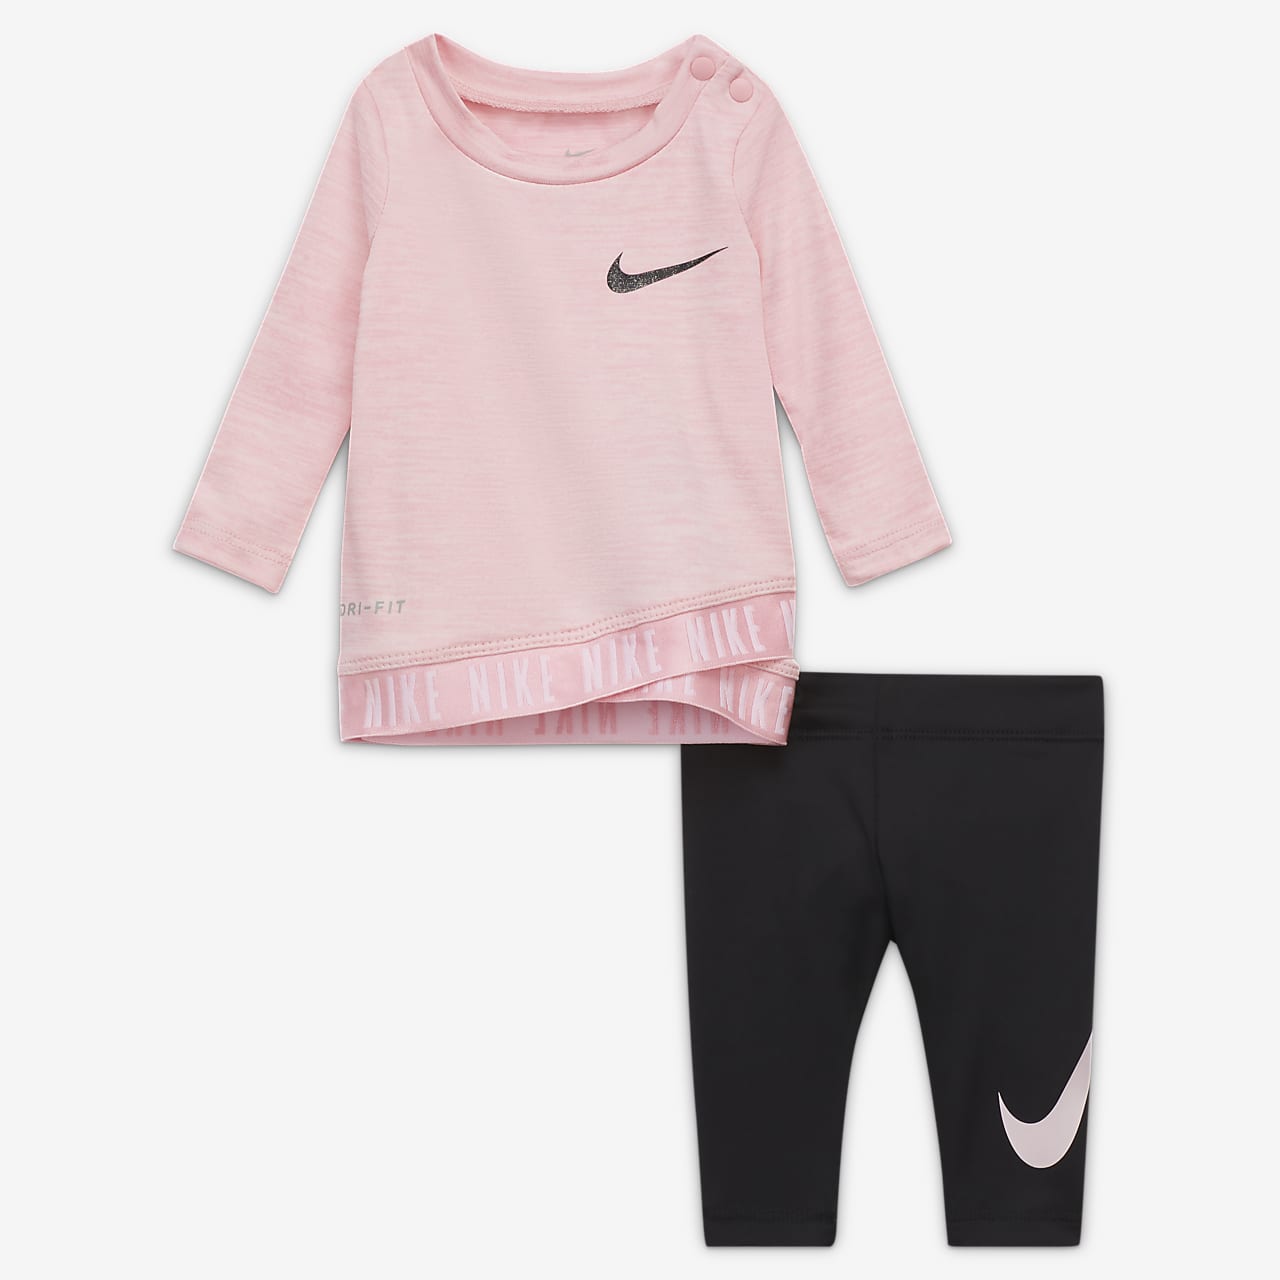 Nike Dri-FIT Baby (0-9M) Top and 